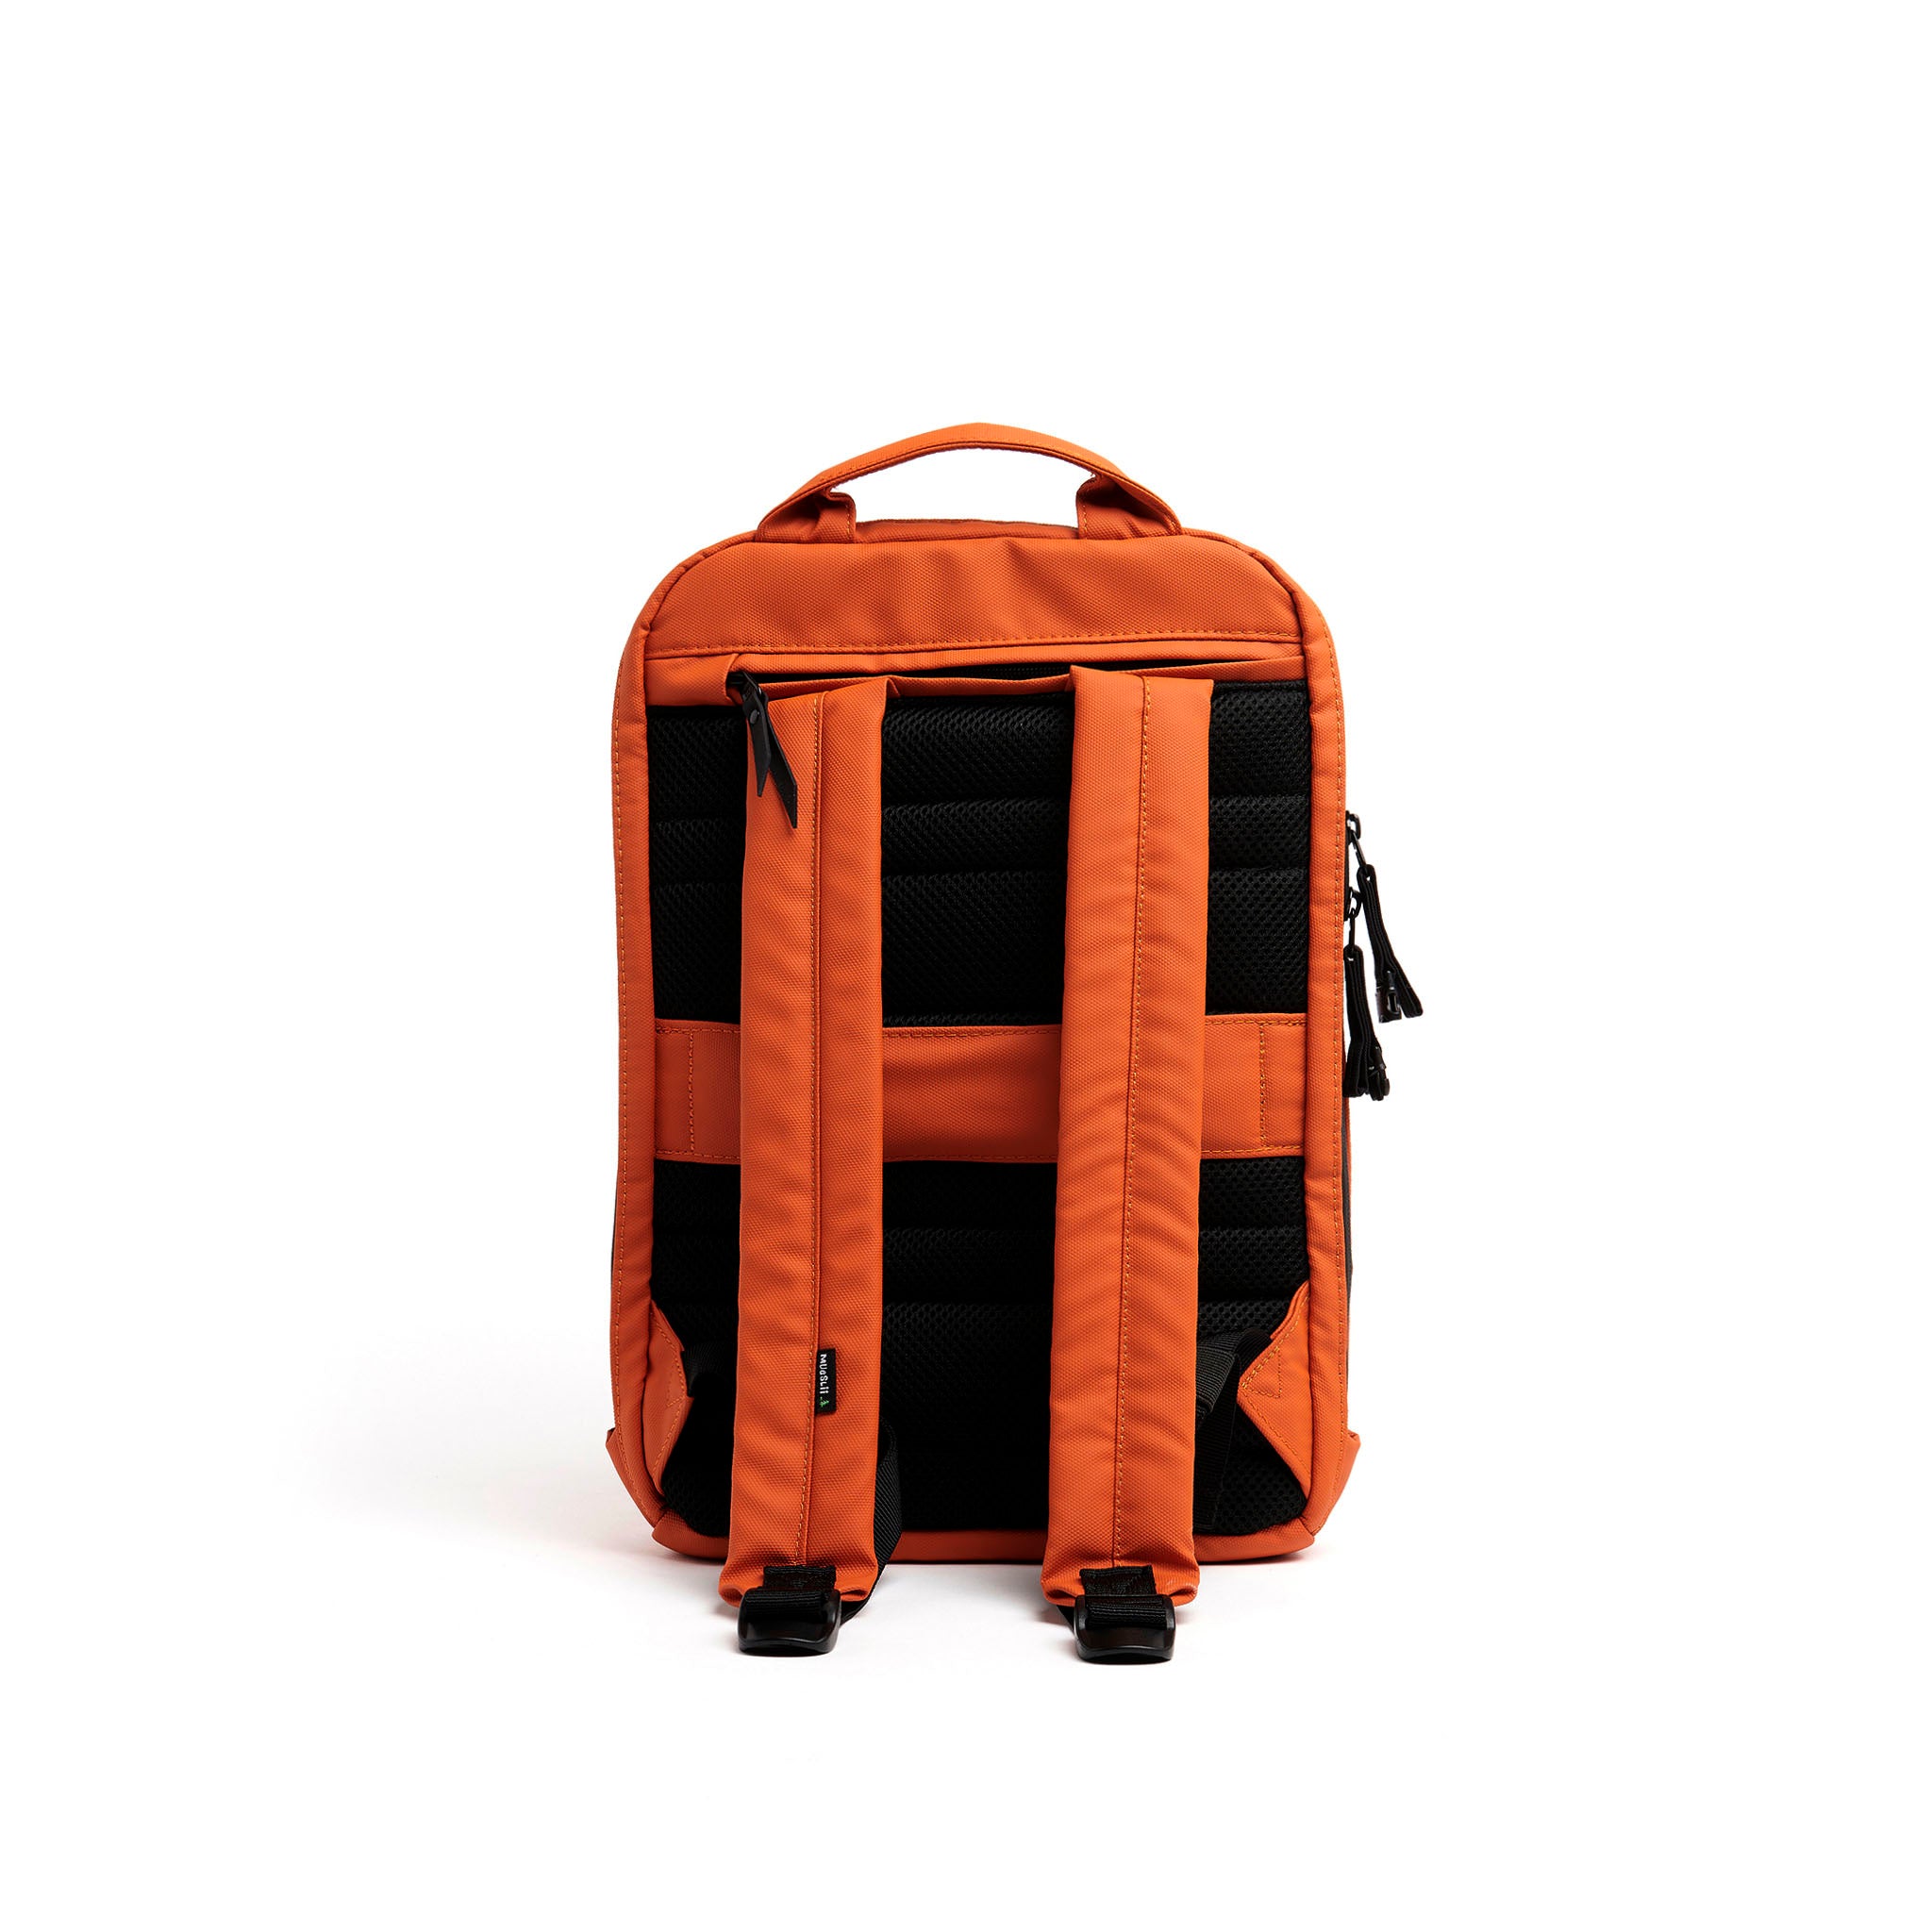 Mueslii small backpack, made of PU coated waterproof nylon, with a laptop compartment, color orange, back view.